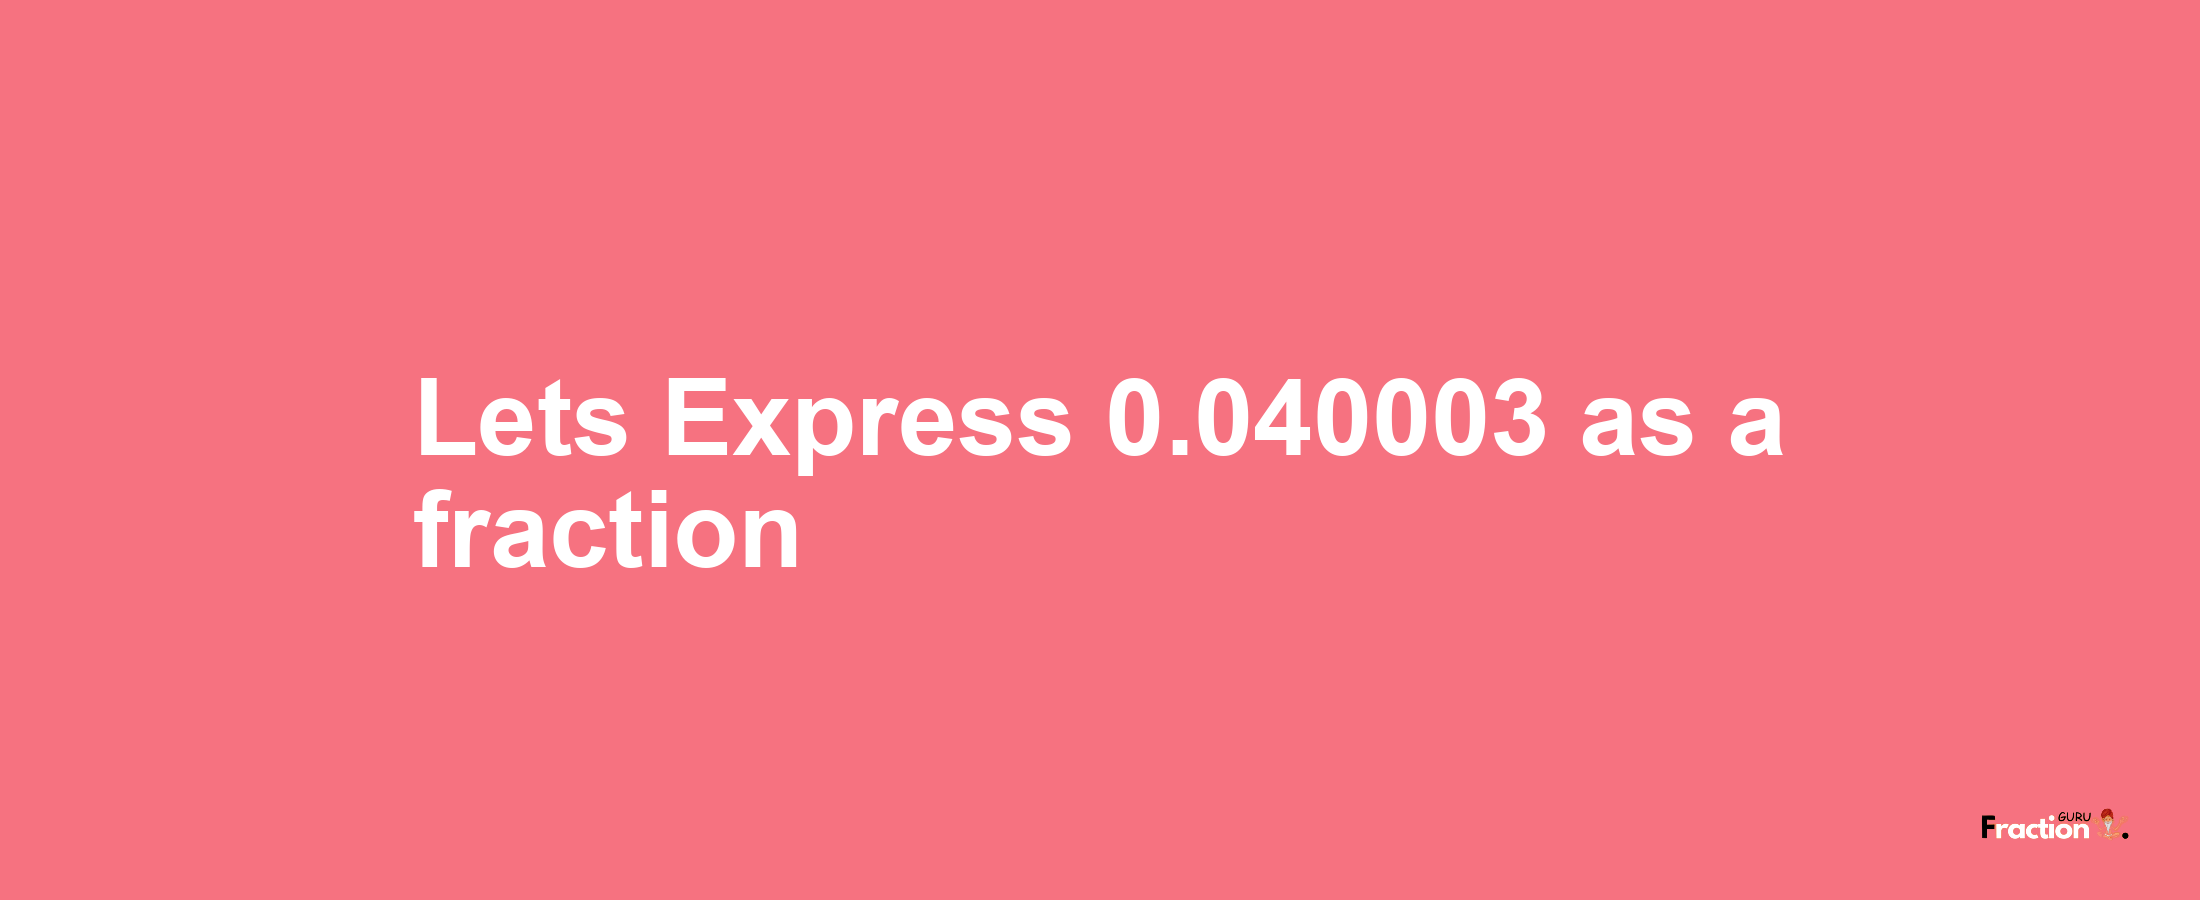 Lets Express 0.040003 as afraction